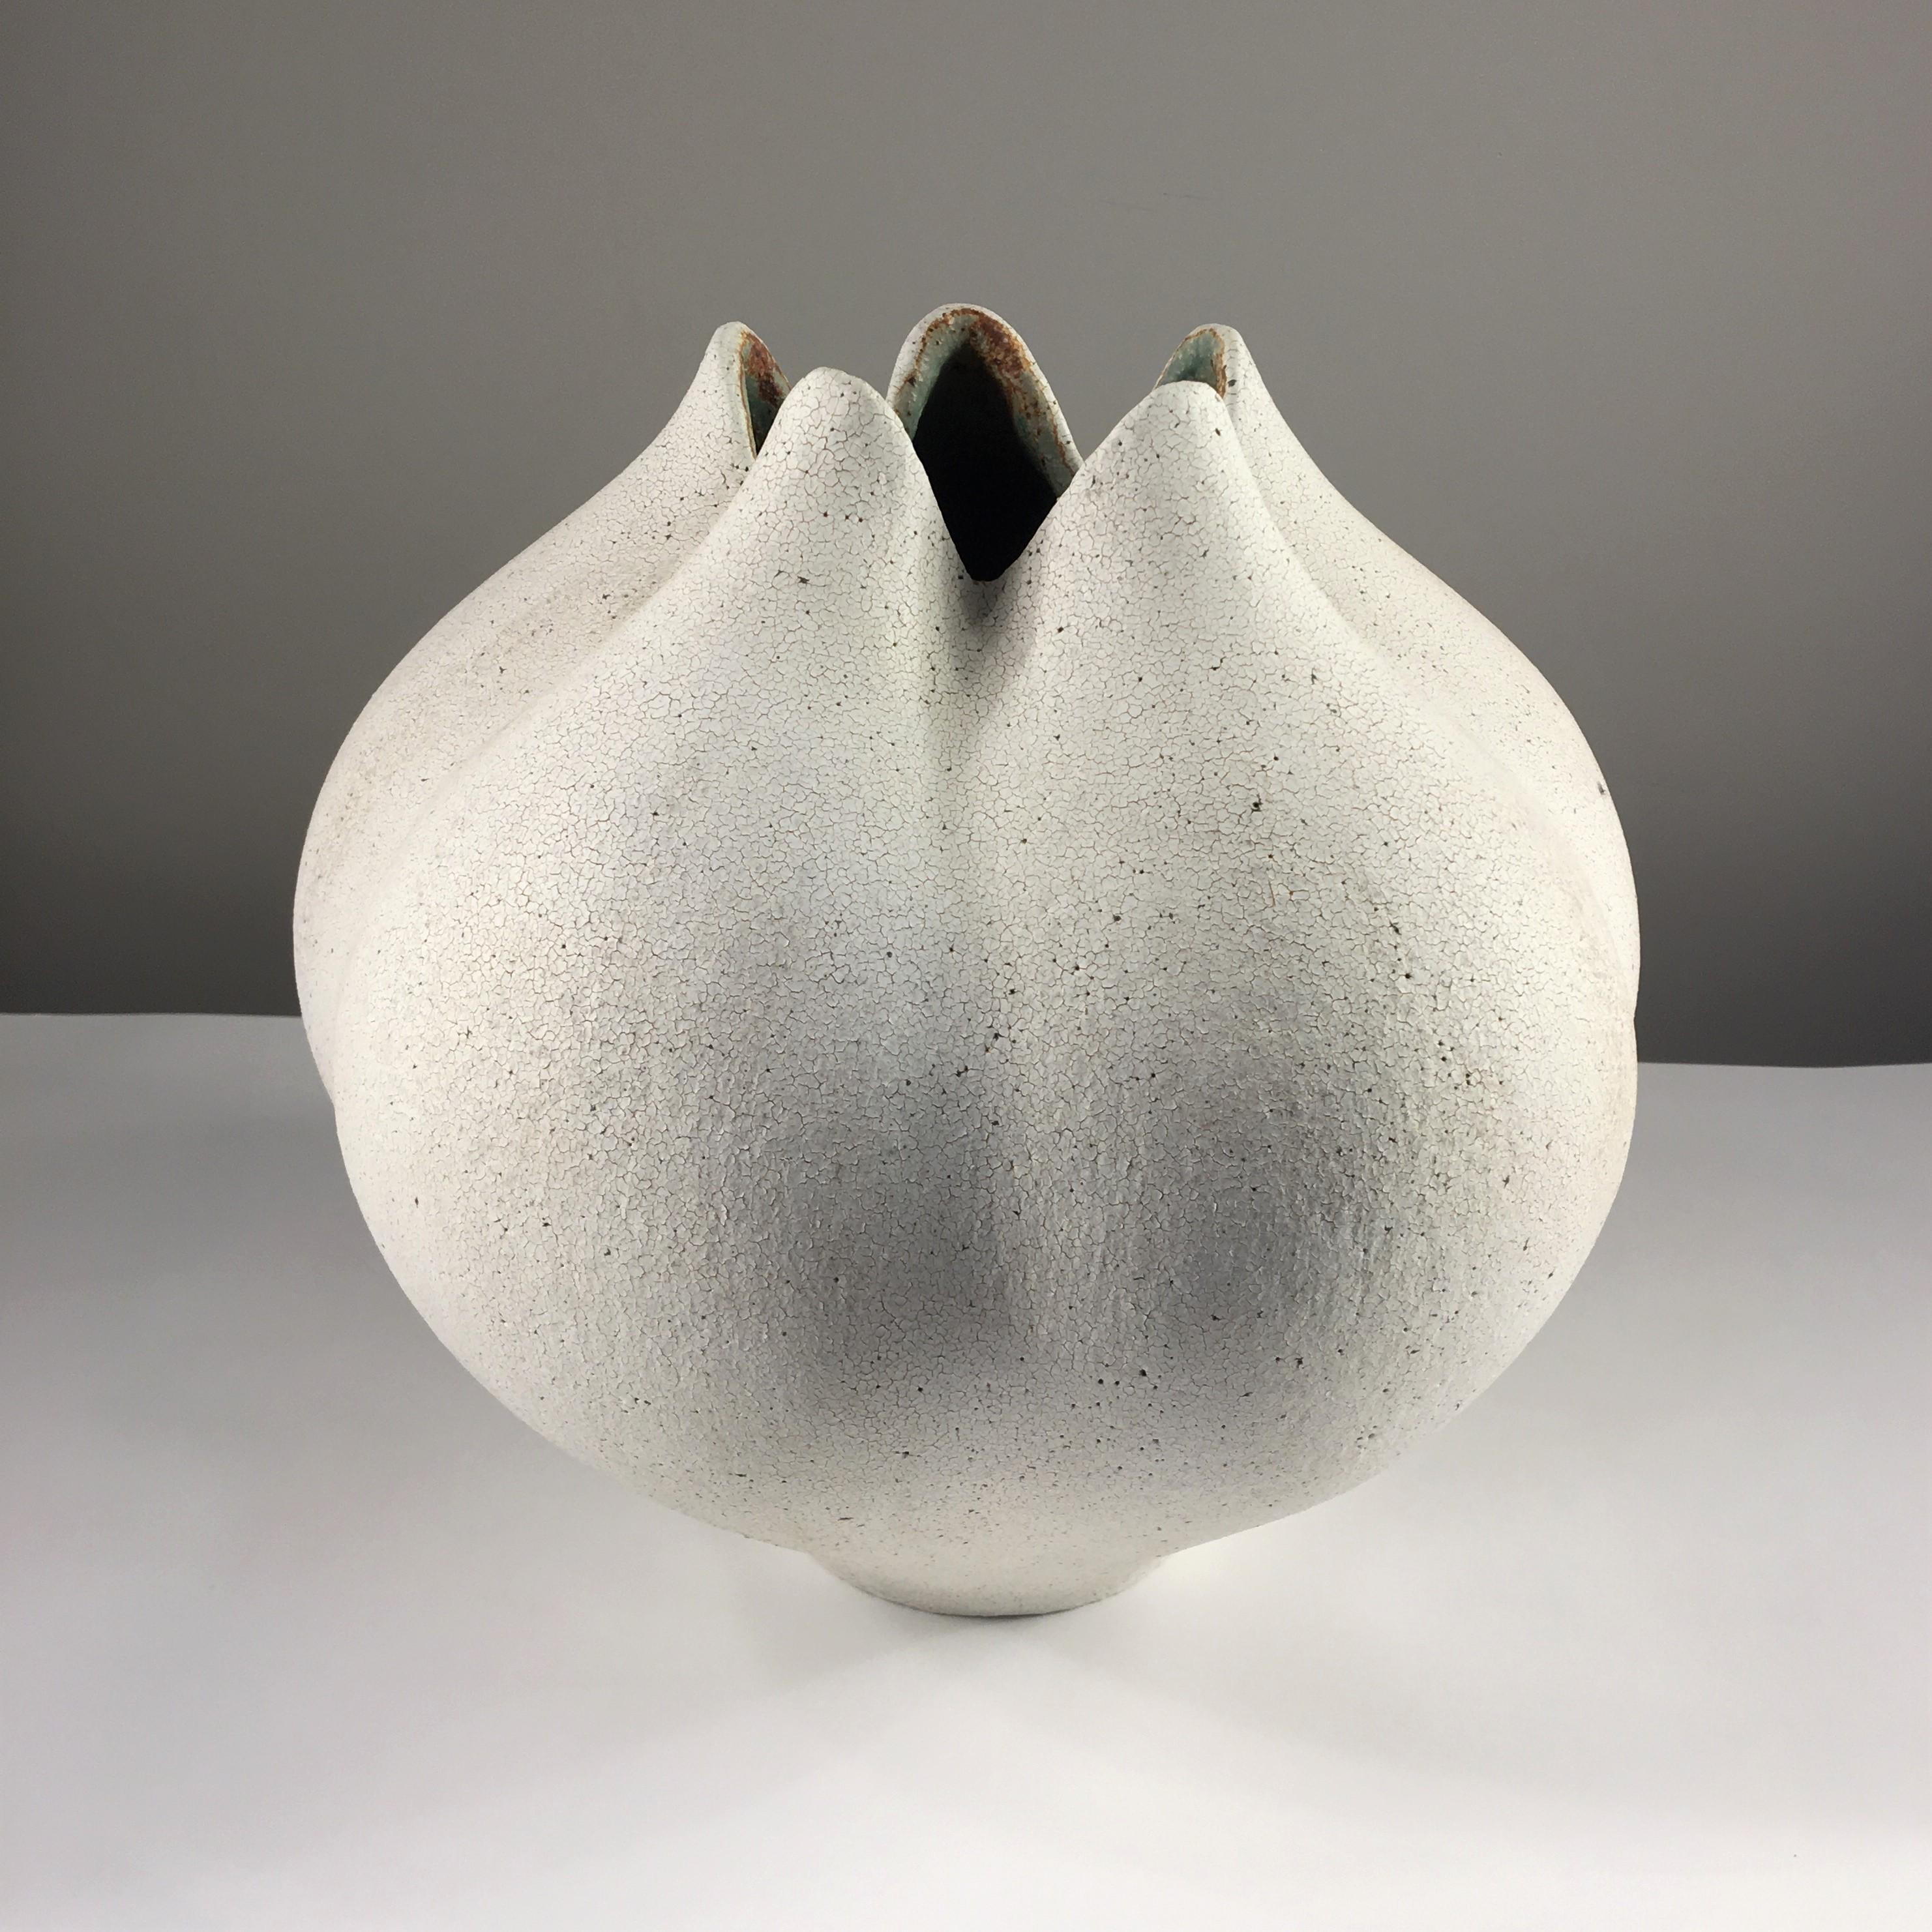 American Round Ceramic Blossom Vase with Petals by Yumiko Kuga For Sale